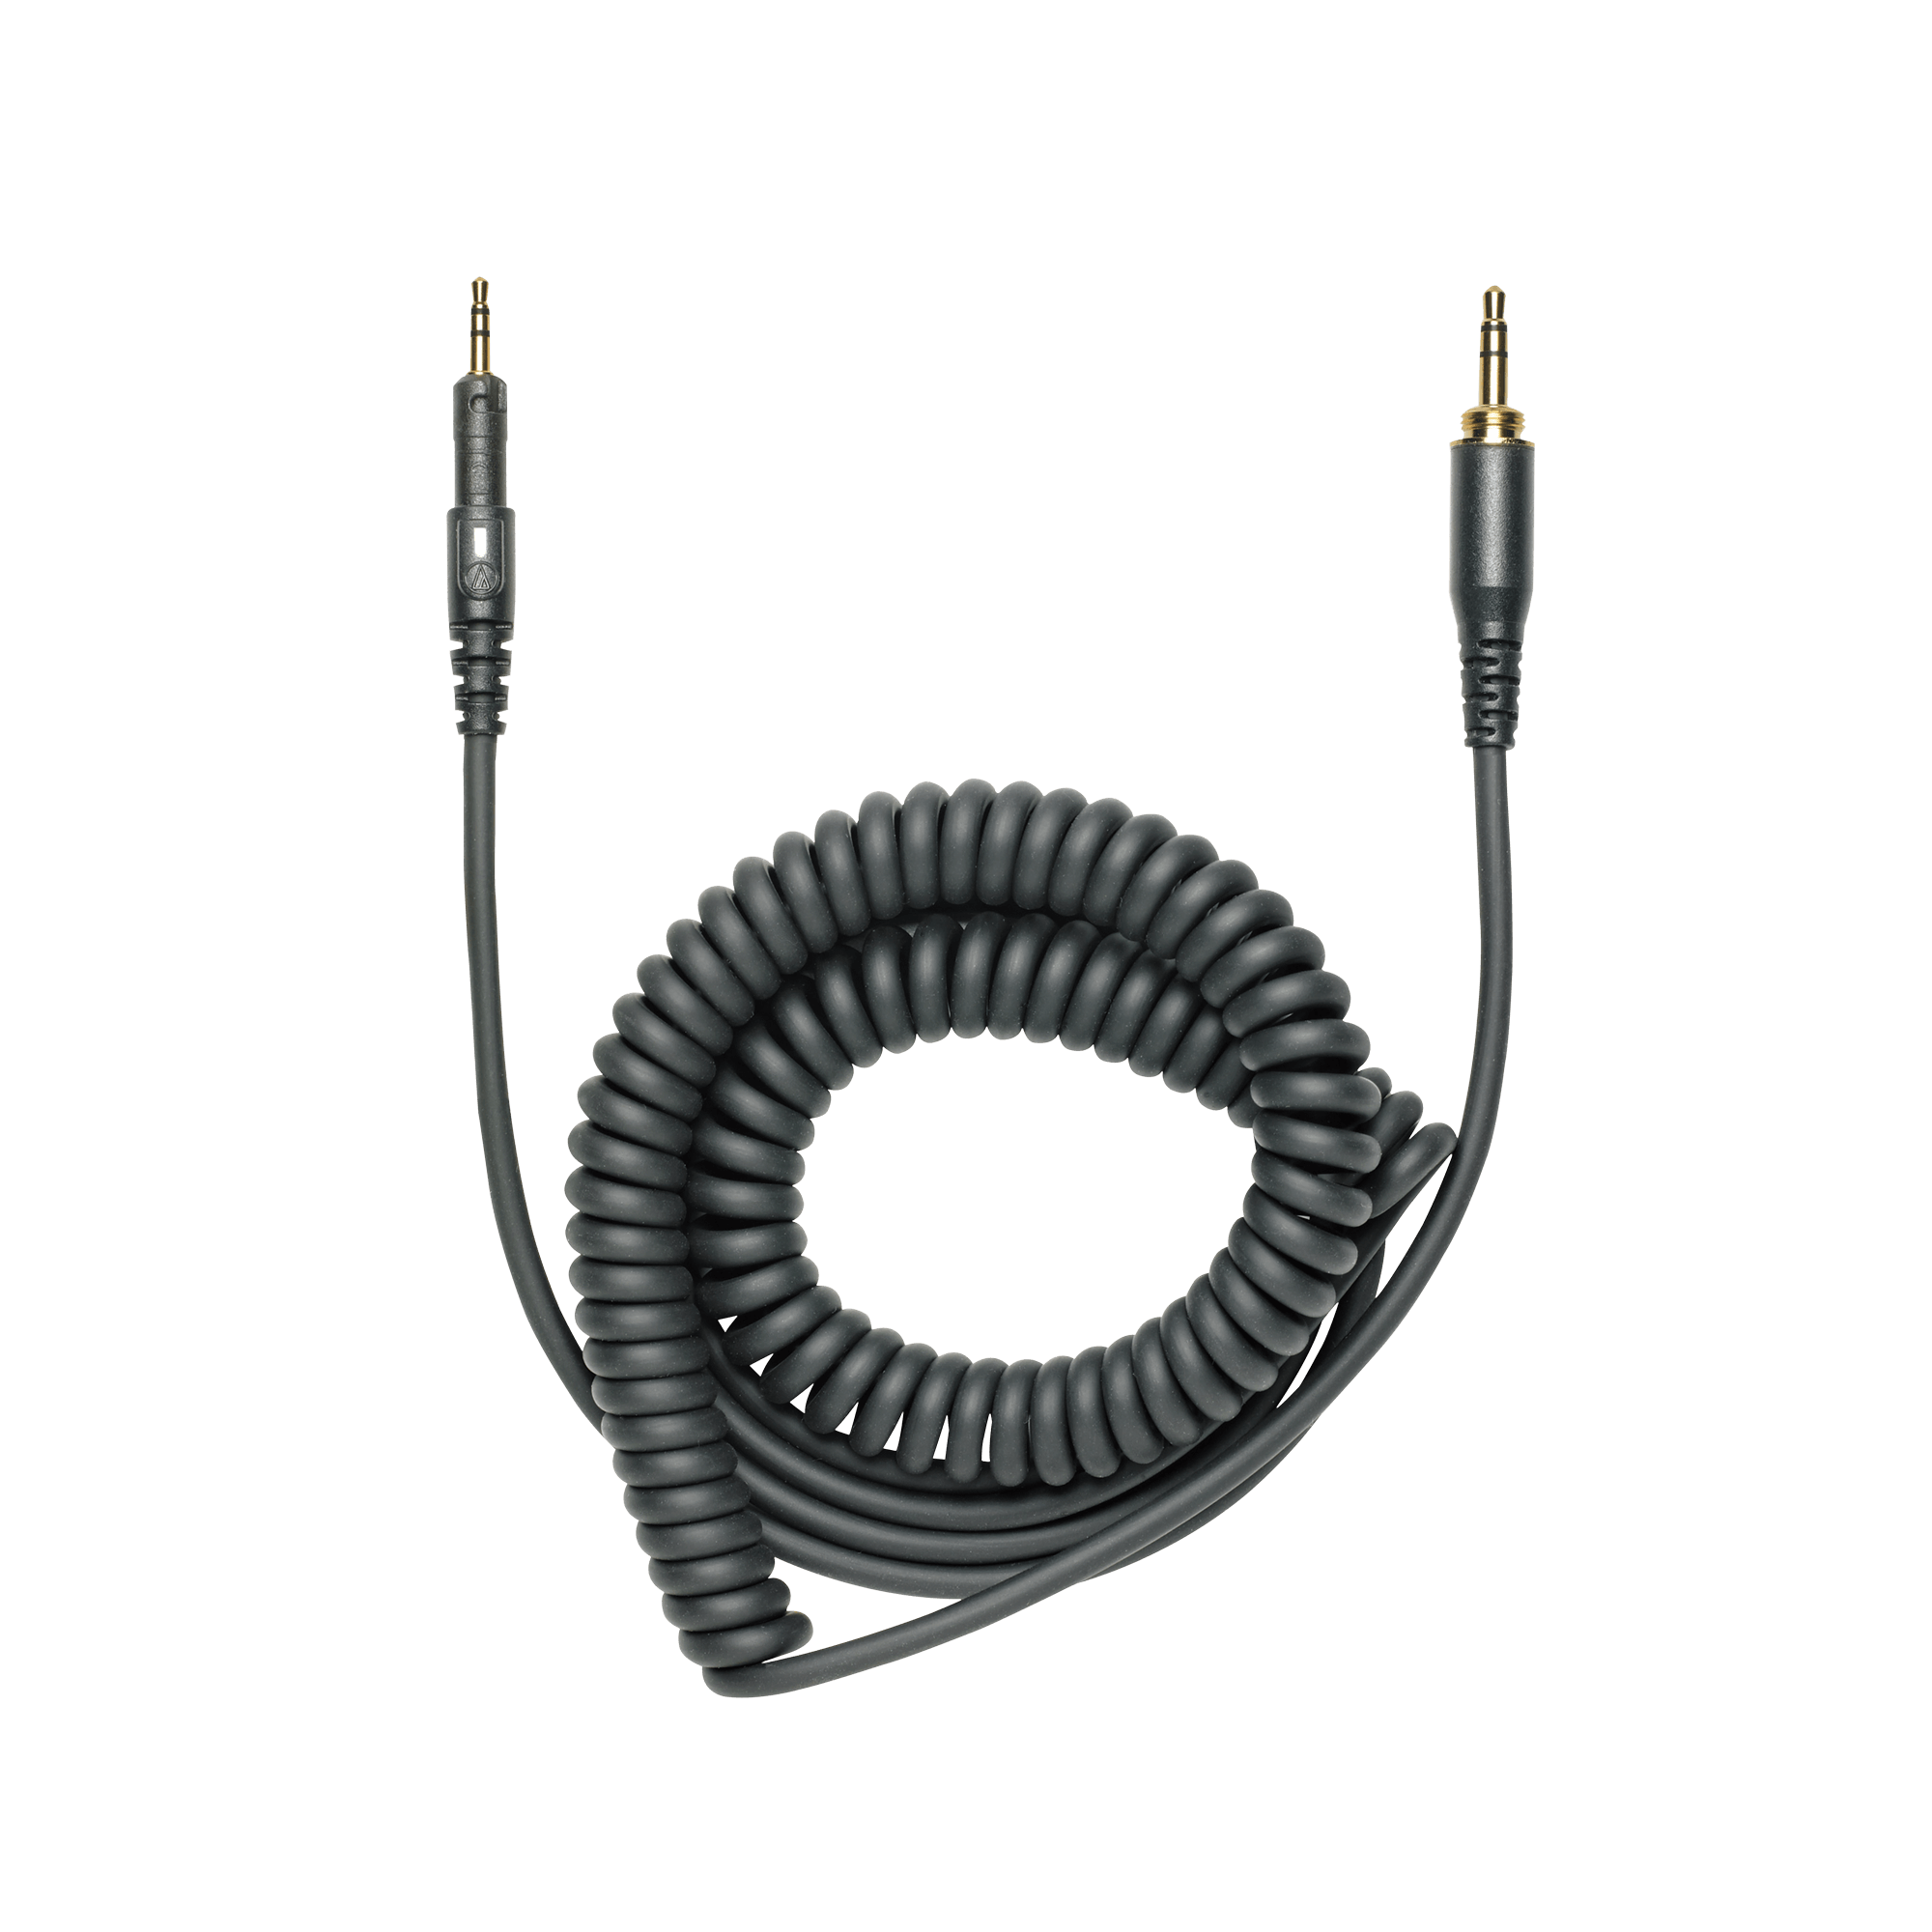 Audio-Technica Coiled AUX Cord Replacement for Audio Technica M40x Wired Headphones Replace 